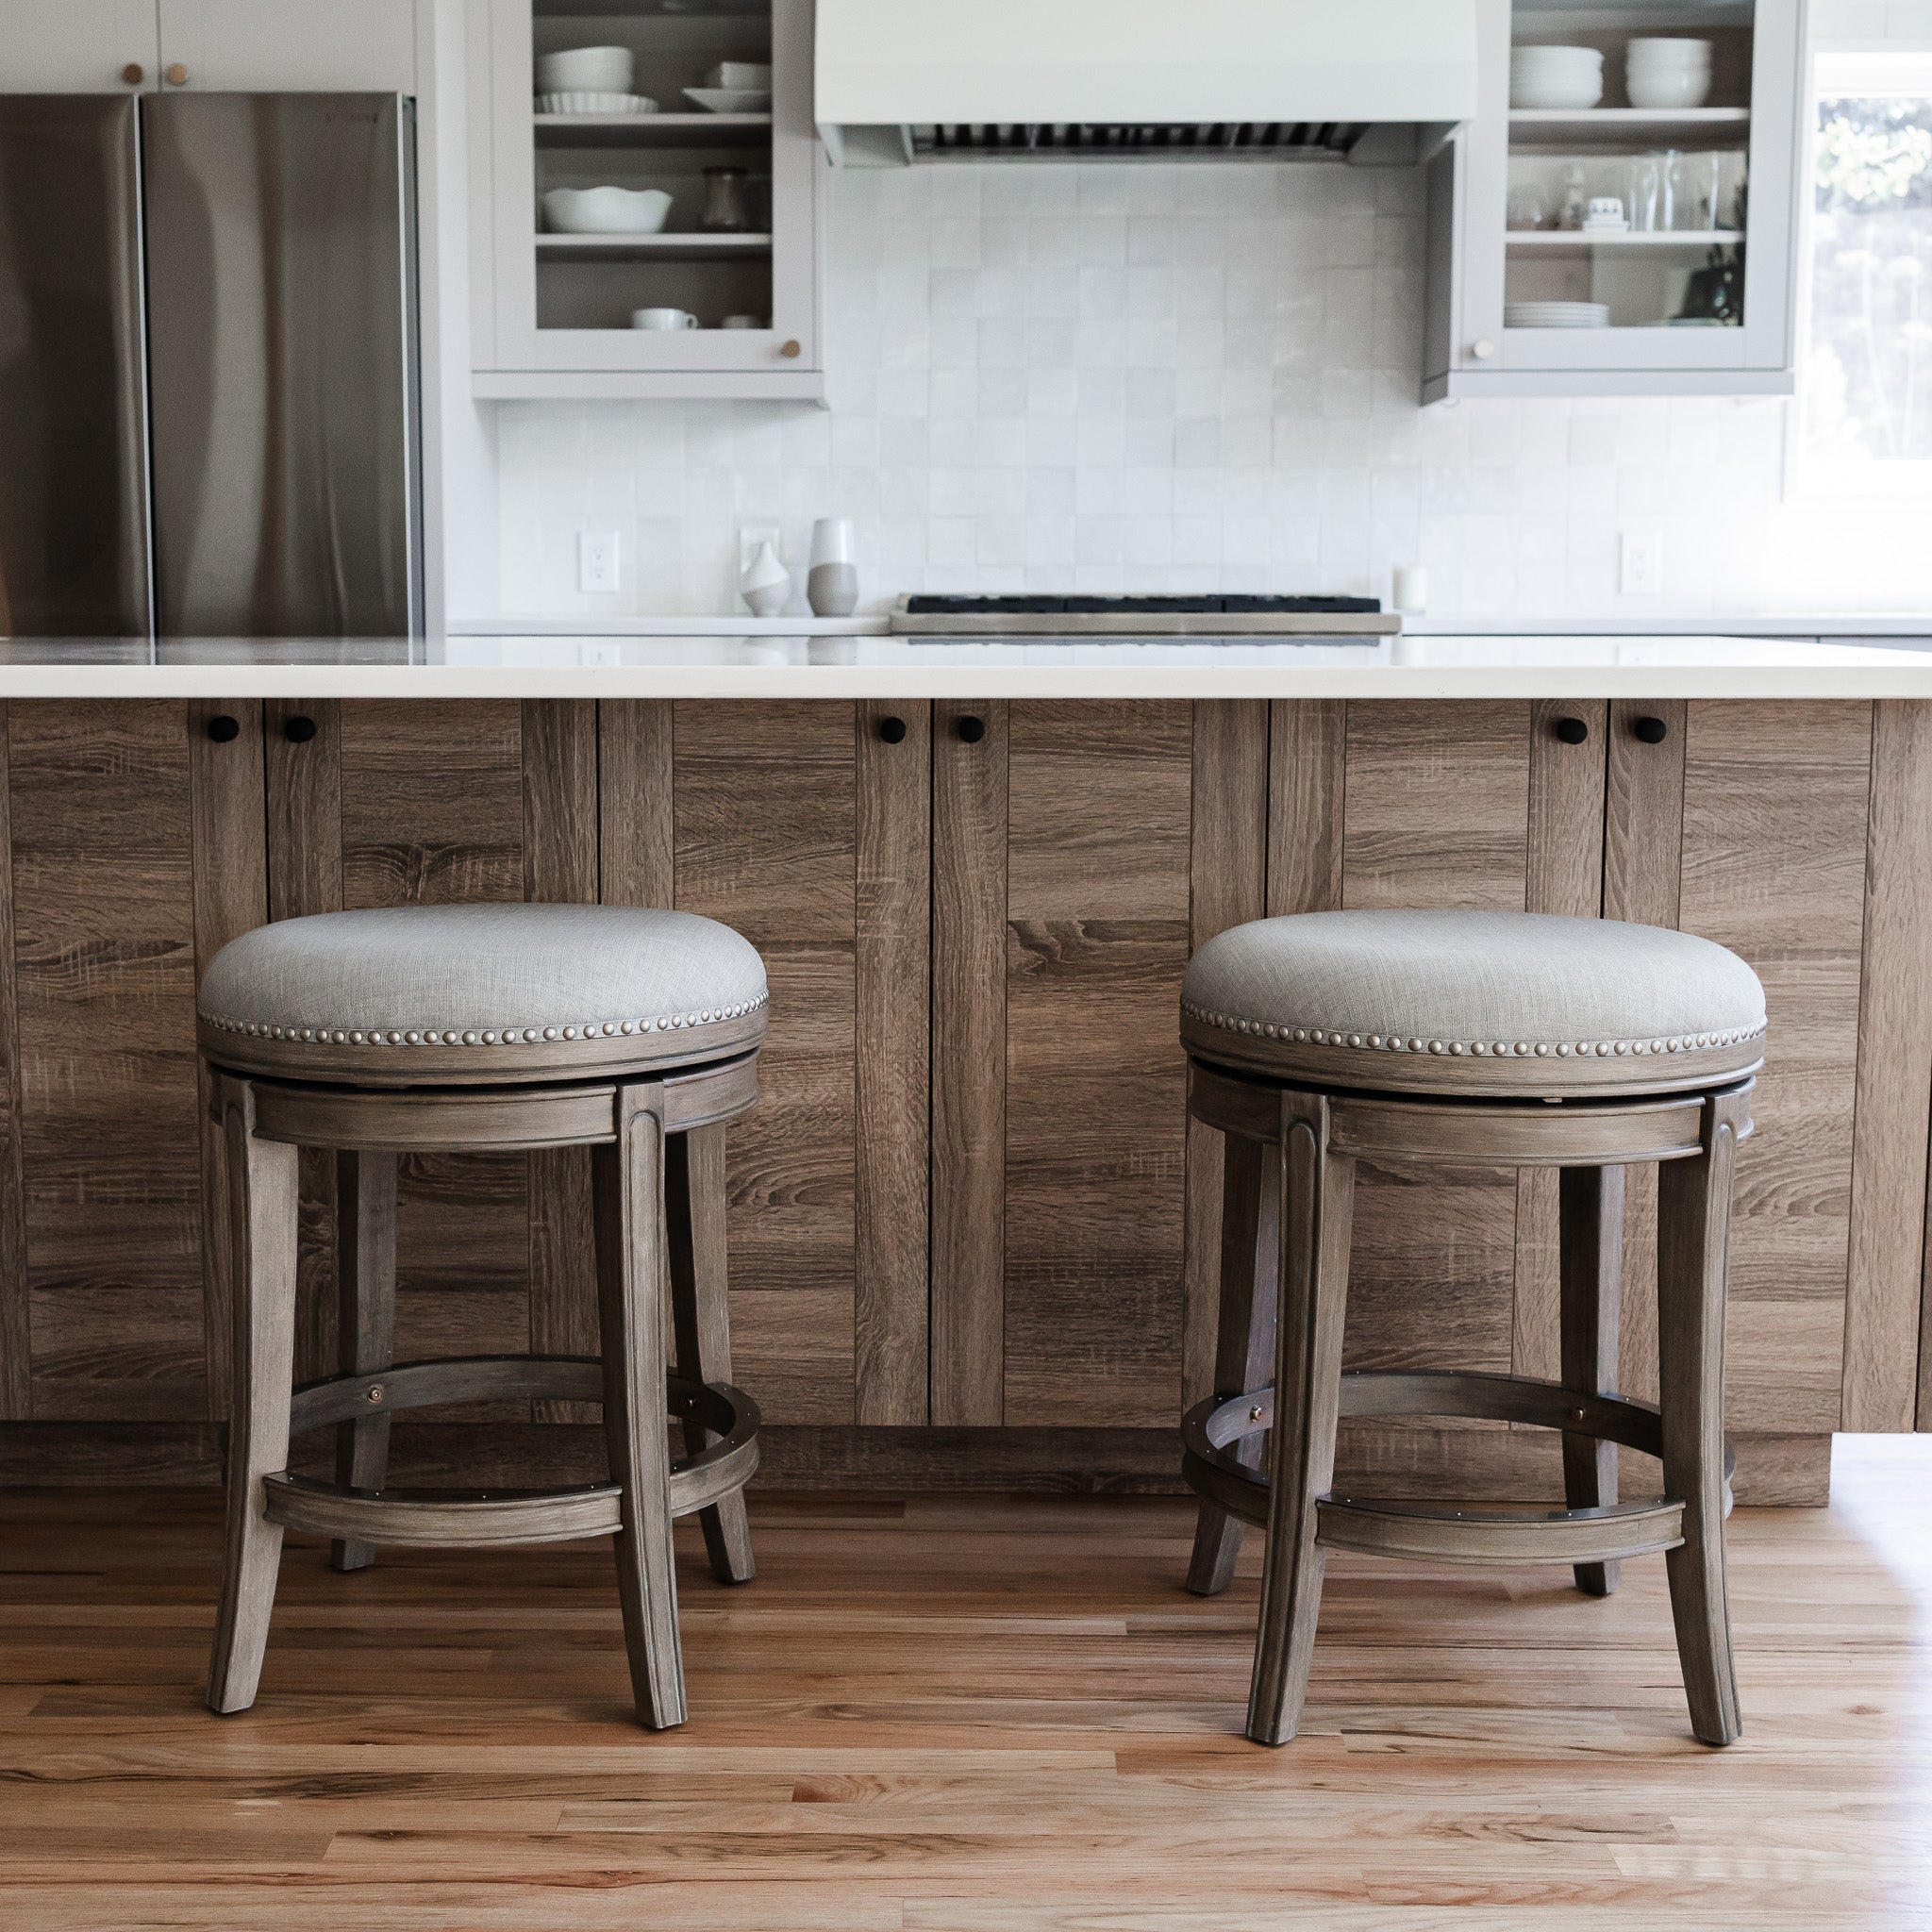 Alexander Backless Counter Stool in Reclaimed Oak Finish with Ash Grey Fabric Upholstery in Stools by Maven Lane